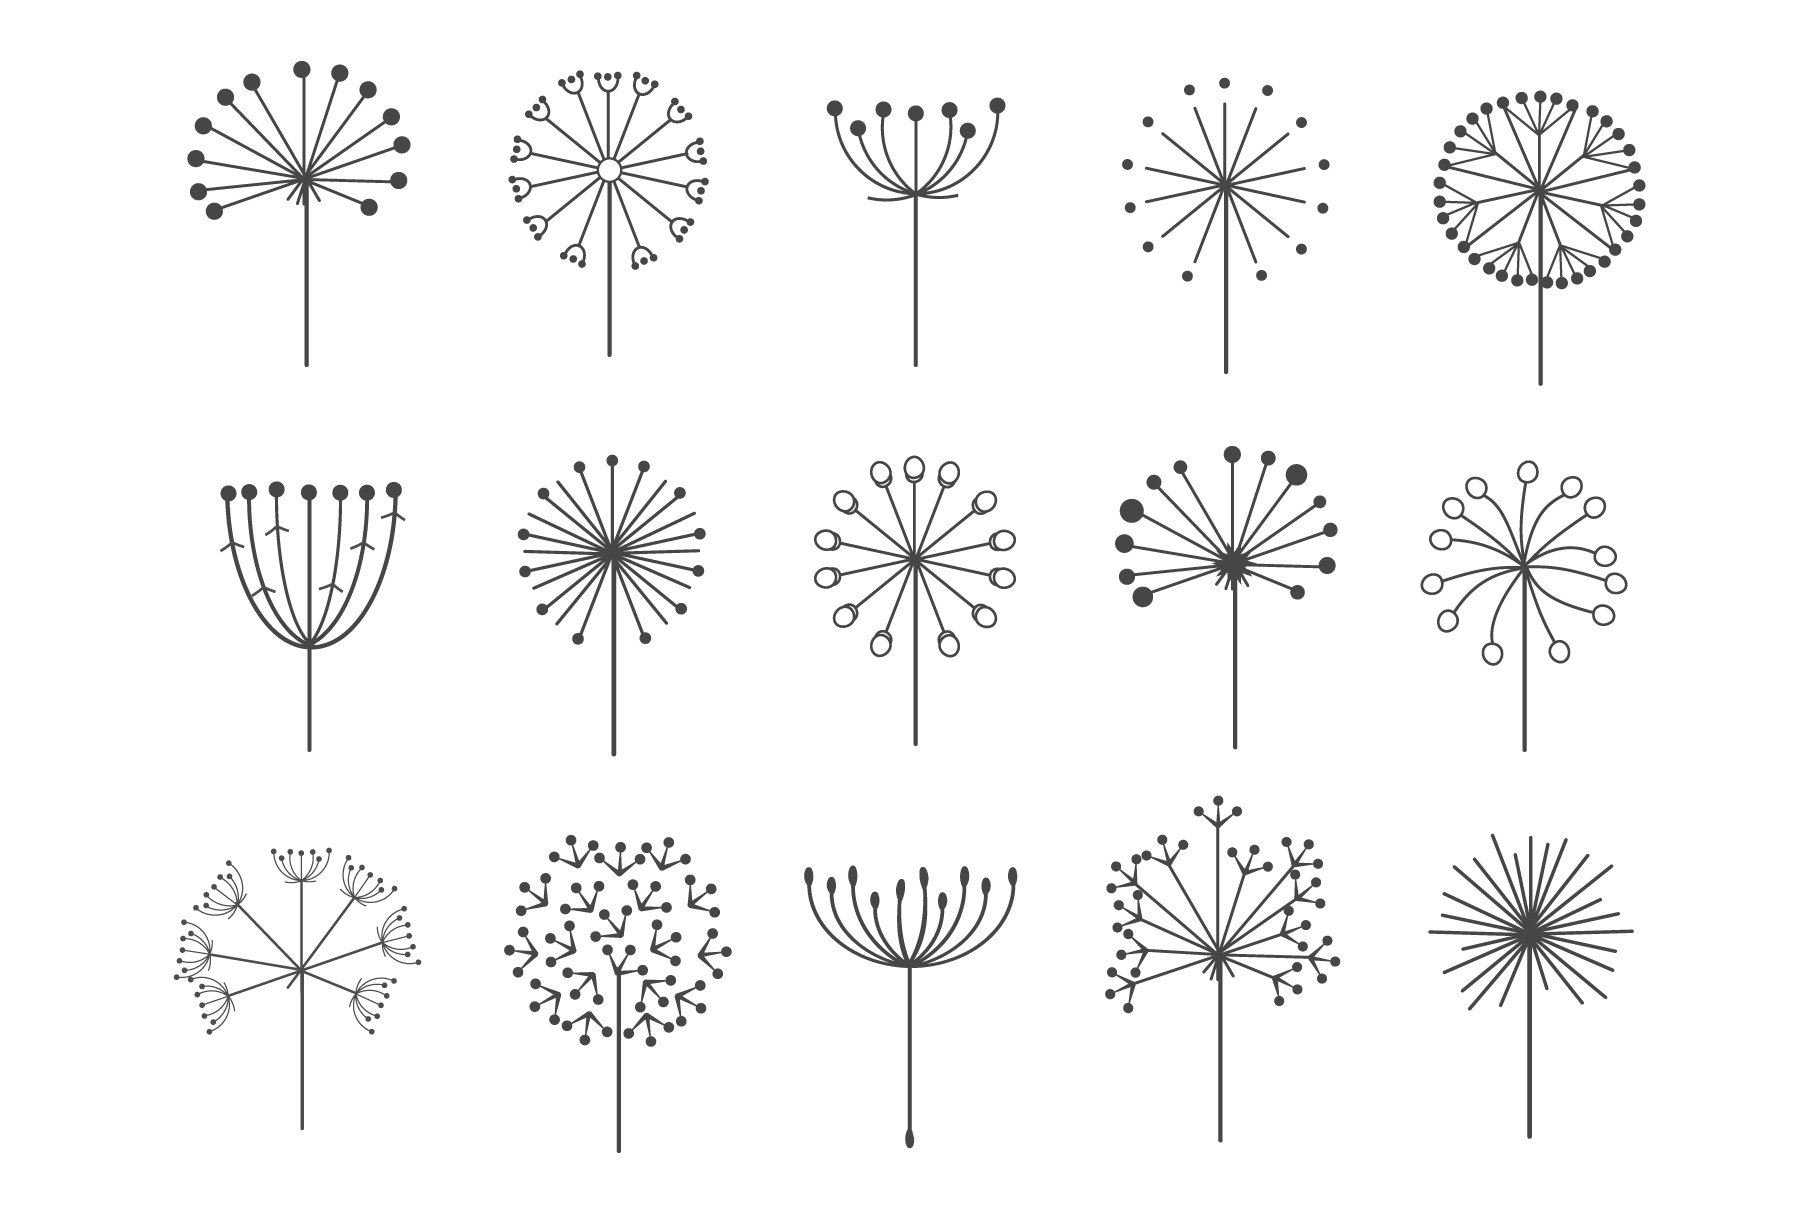 Dandelion flowers with fluffy seeds cover image.